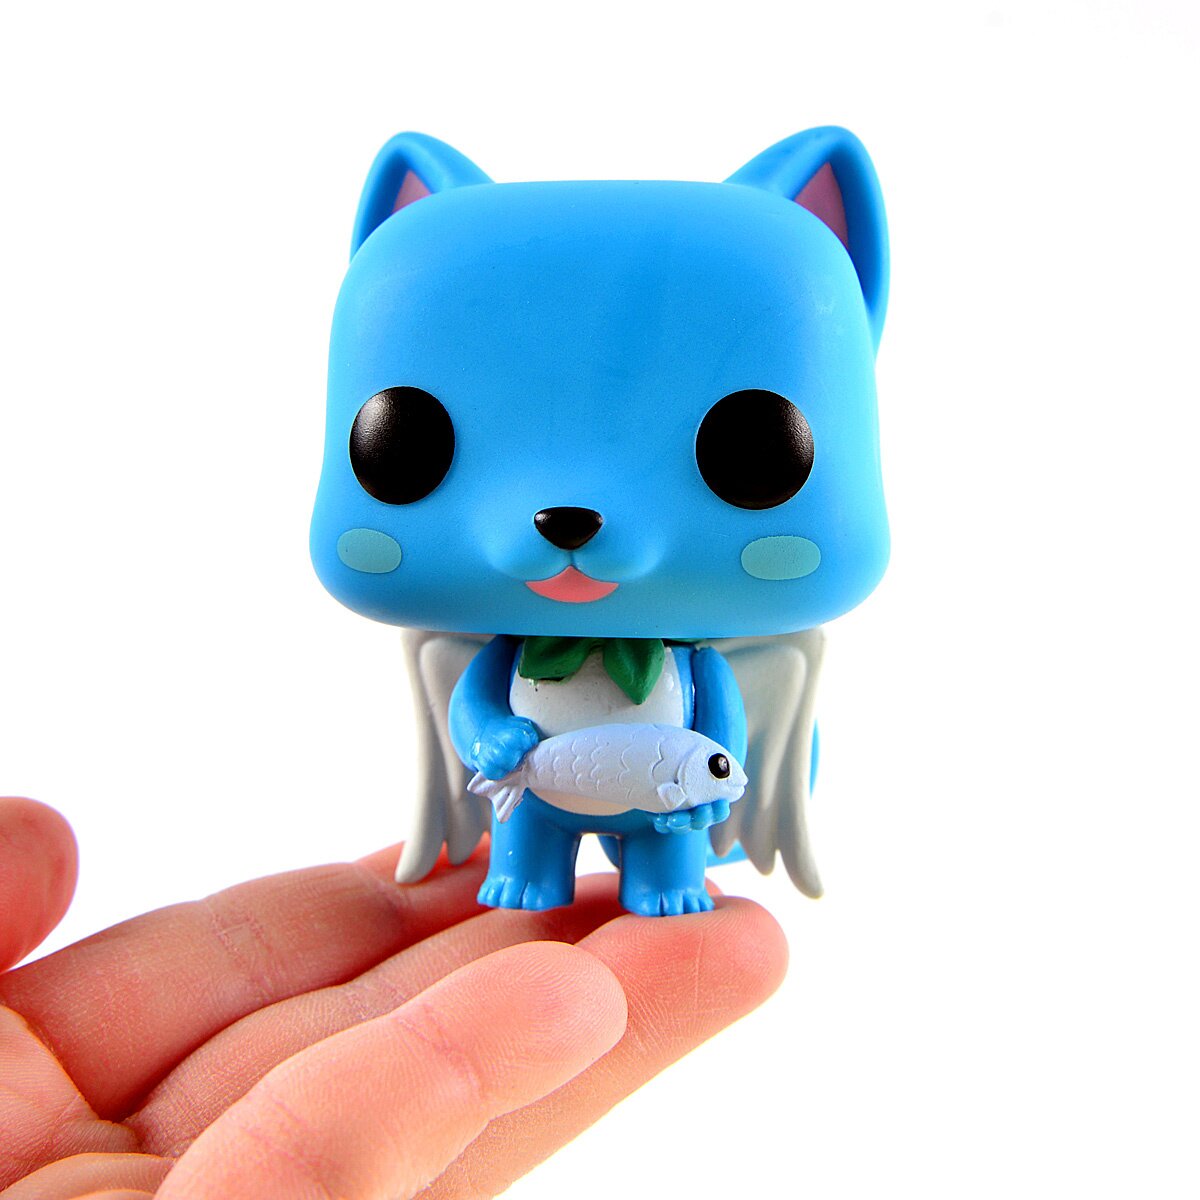 Happy #69 Hot Topic Exclusive Pre-Release Funko Pop! Animation Fairy Tail